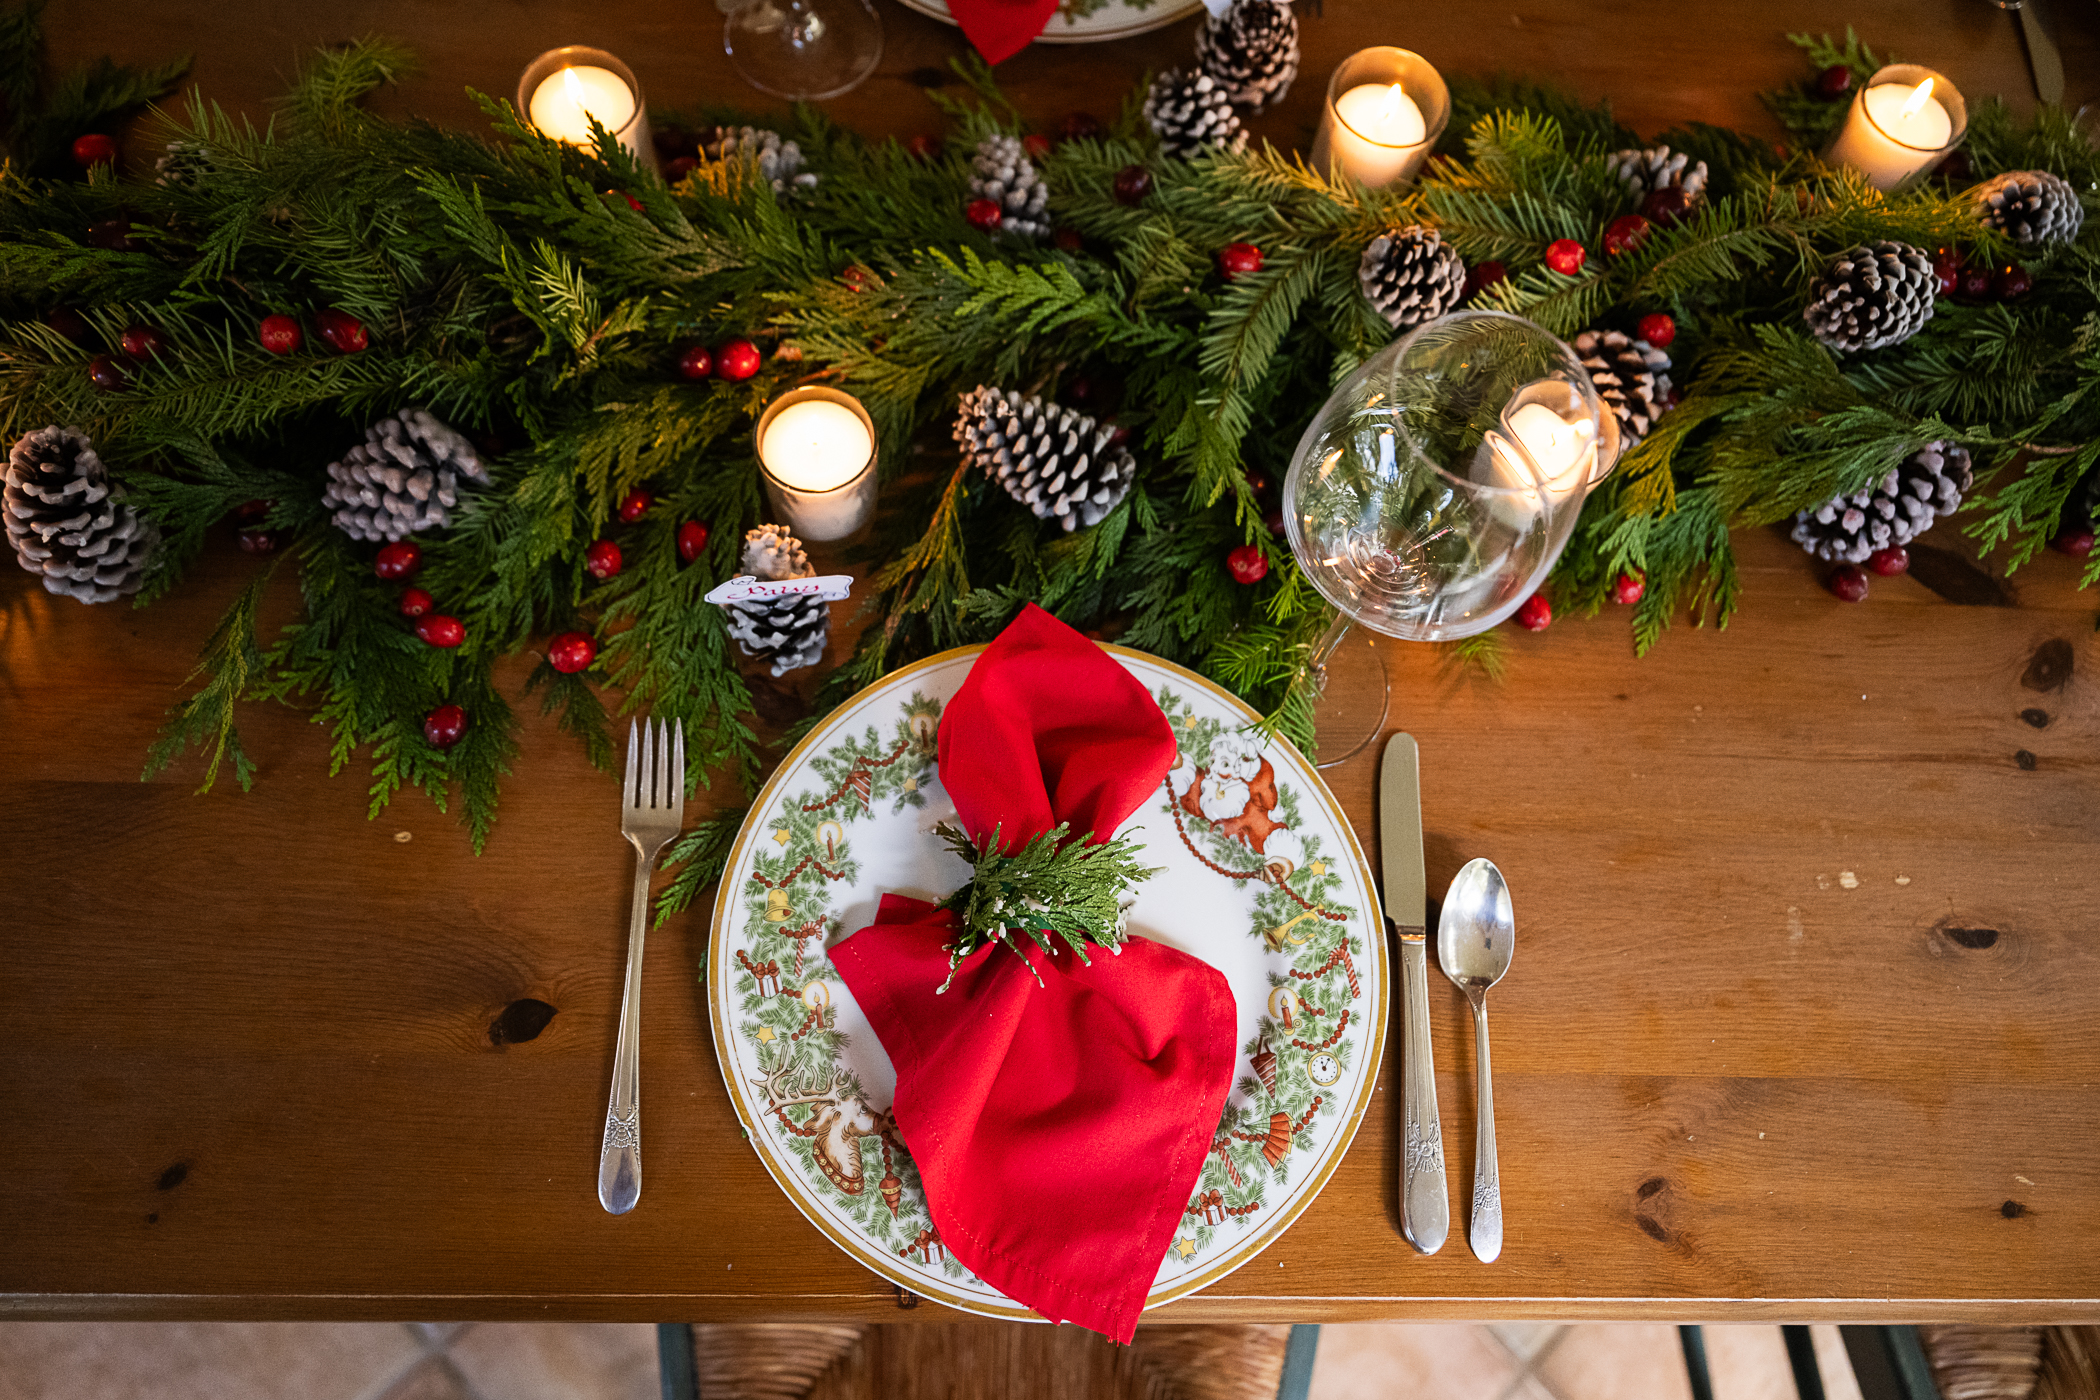 Foraged Pine Cones for an Evergreen-inspired Sustainable Christmas Tablescape